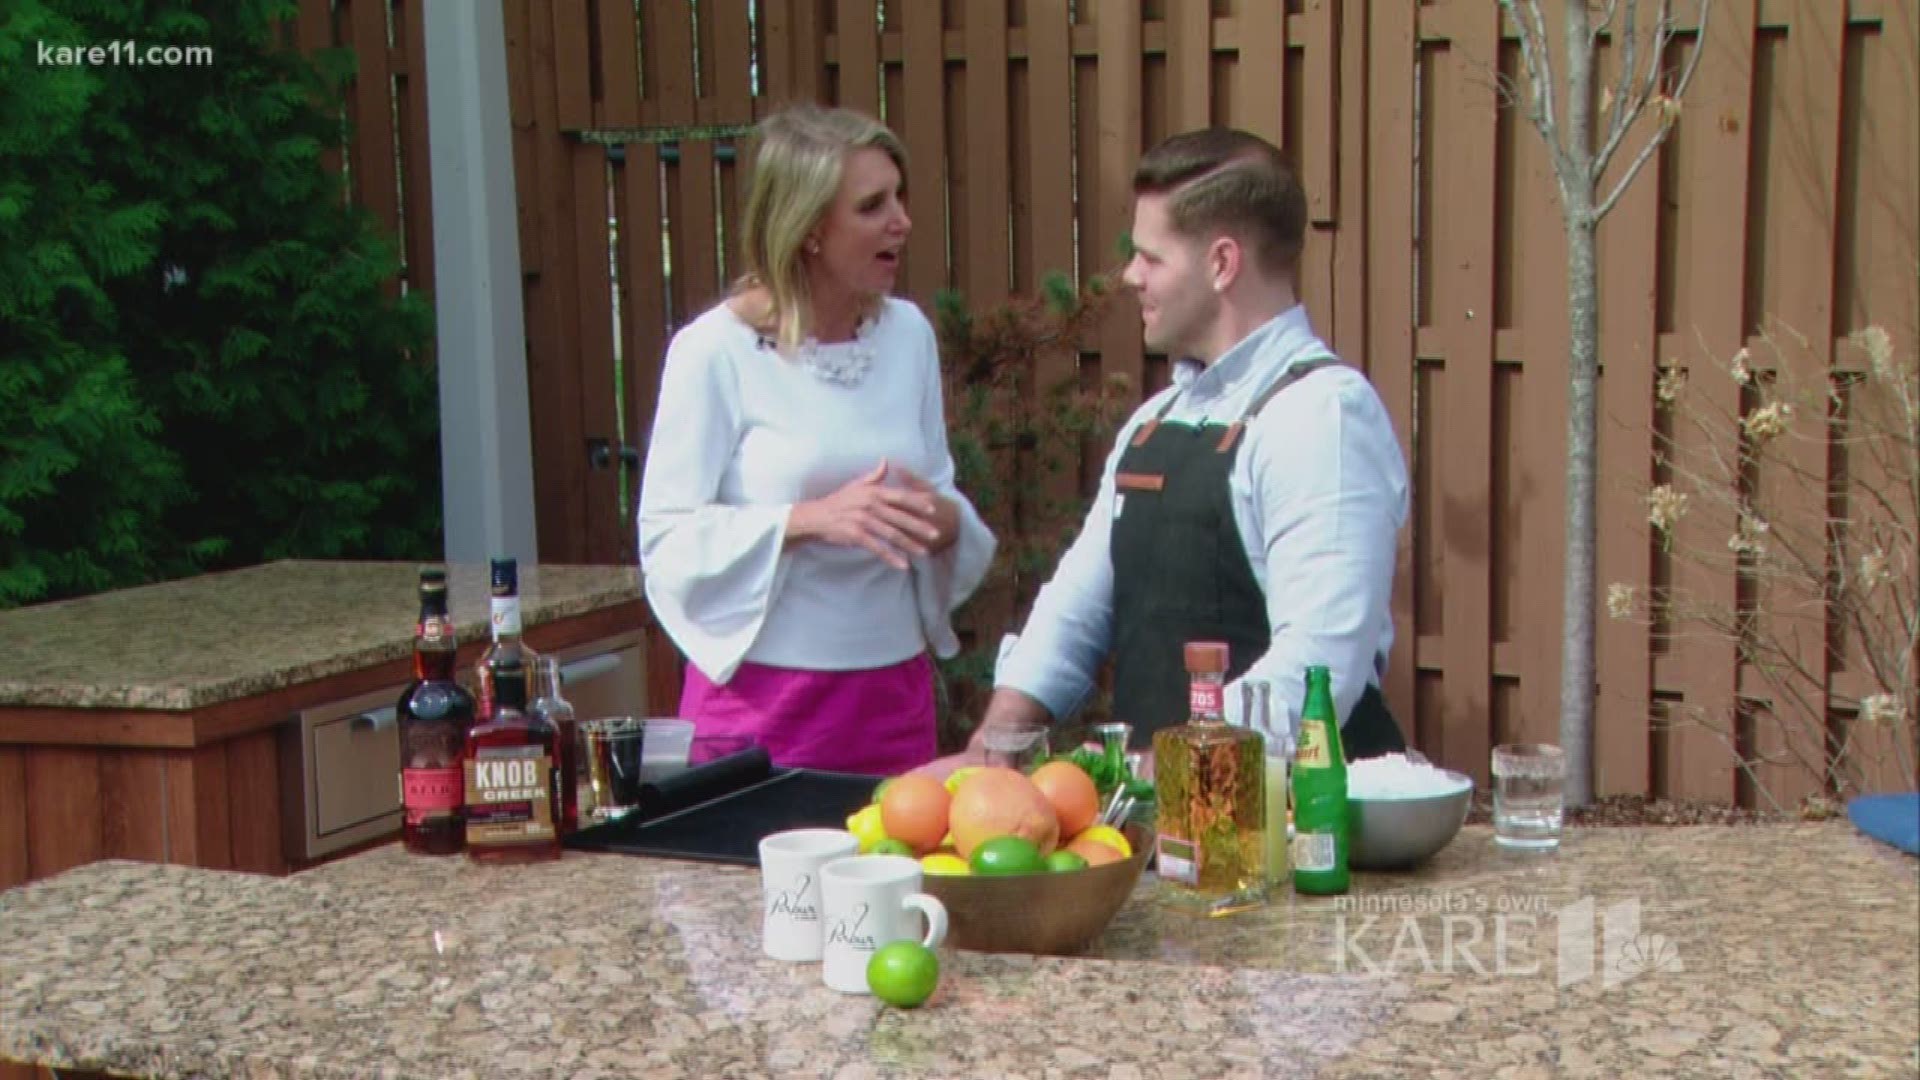 Belinda Jensen heads out to the backyard to mix up some Palomas and Mint  Juleps with Tim Kingston from the newly-opened Parlour in St. Paul.